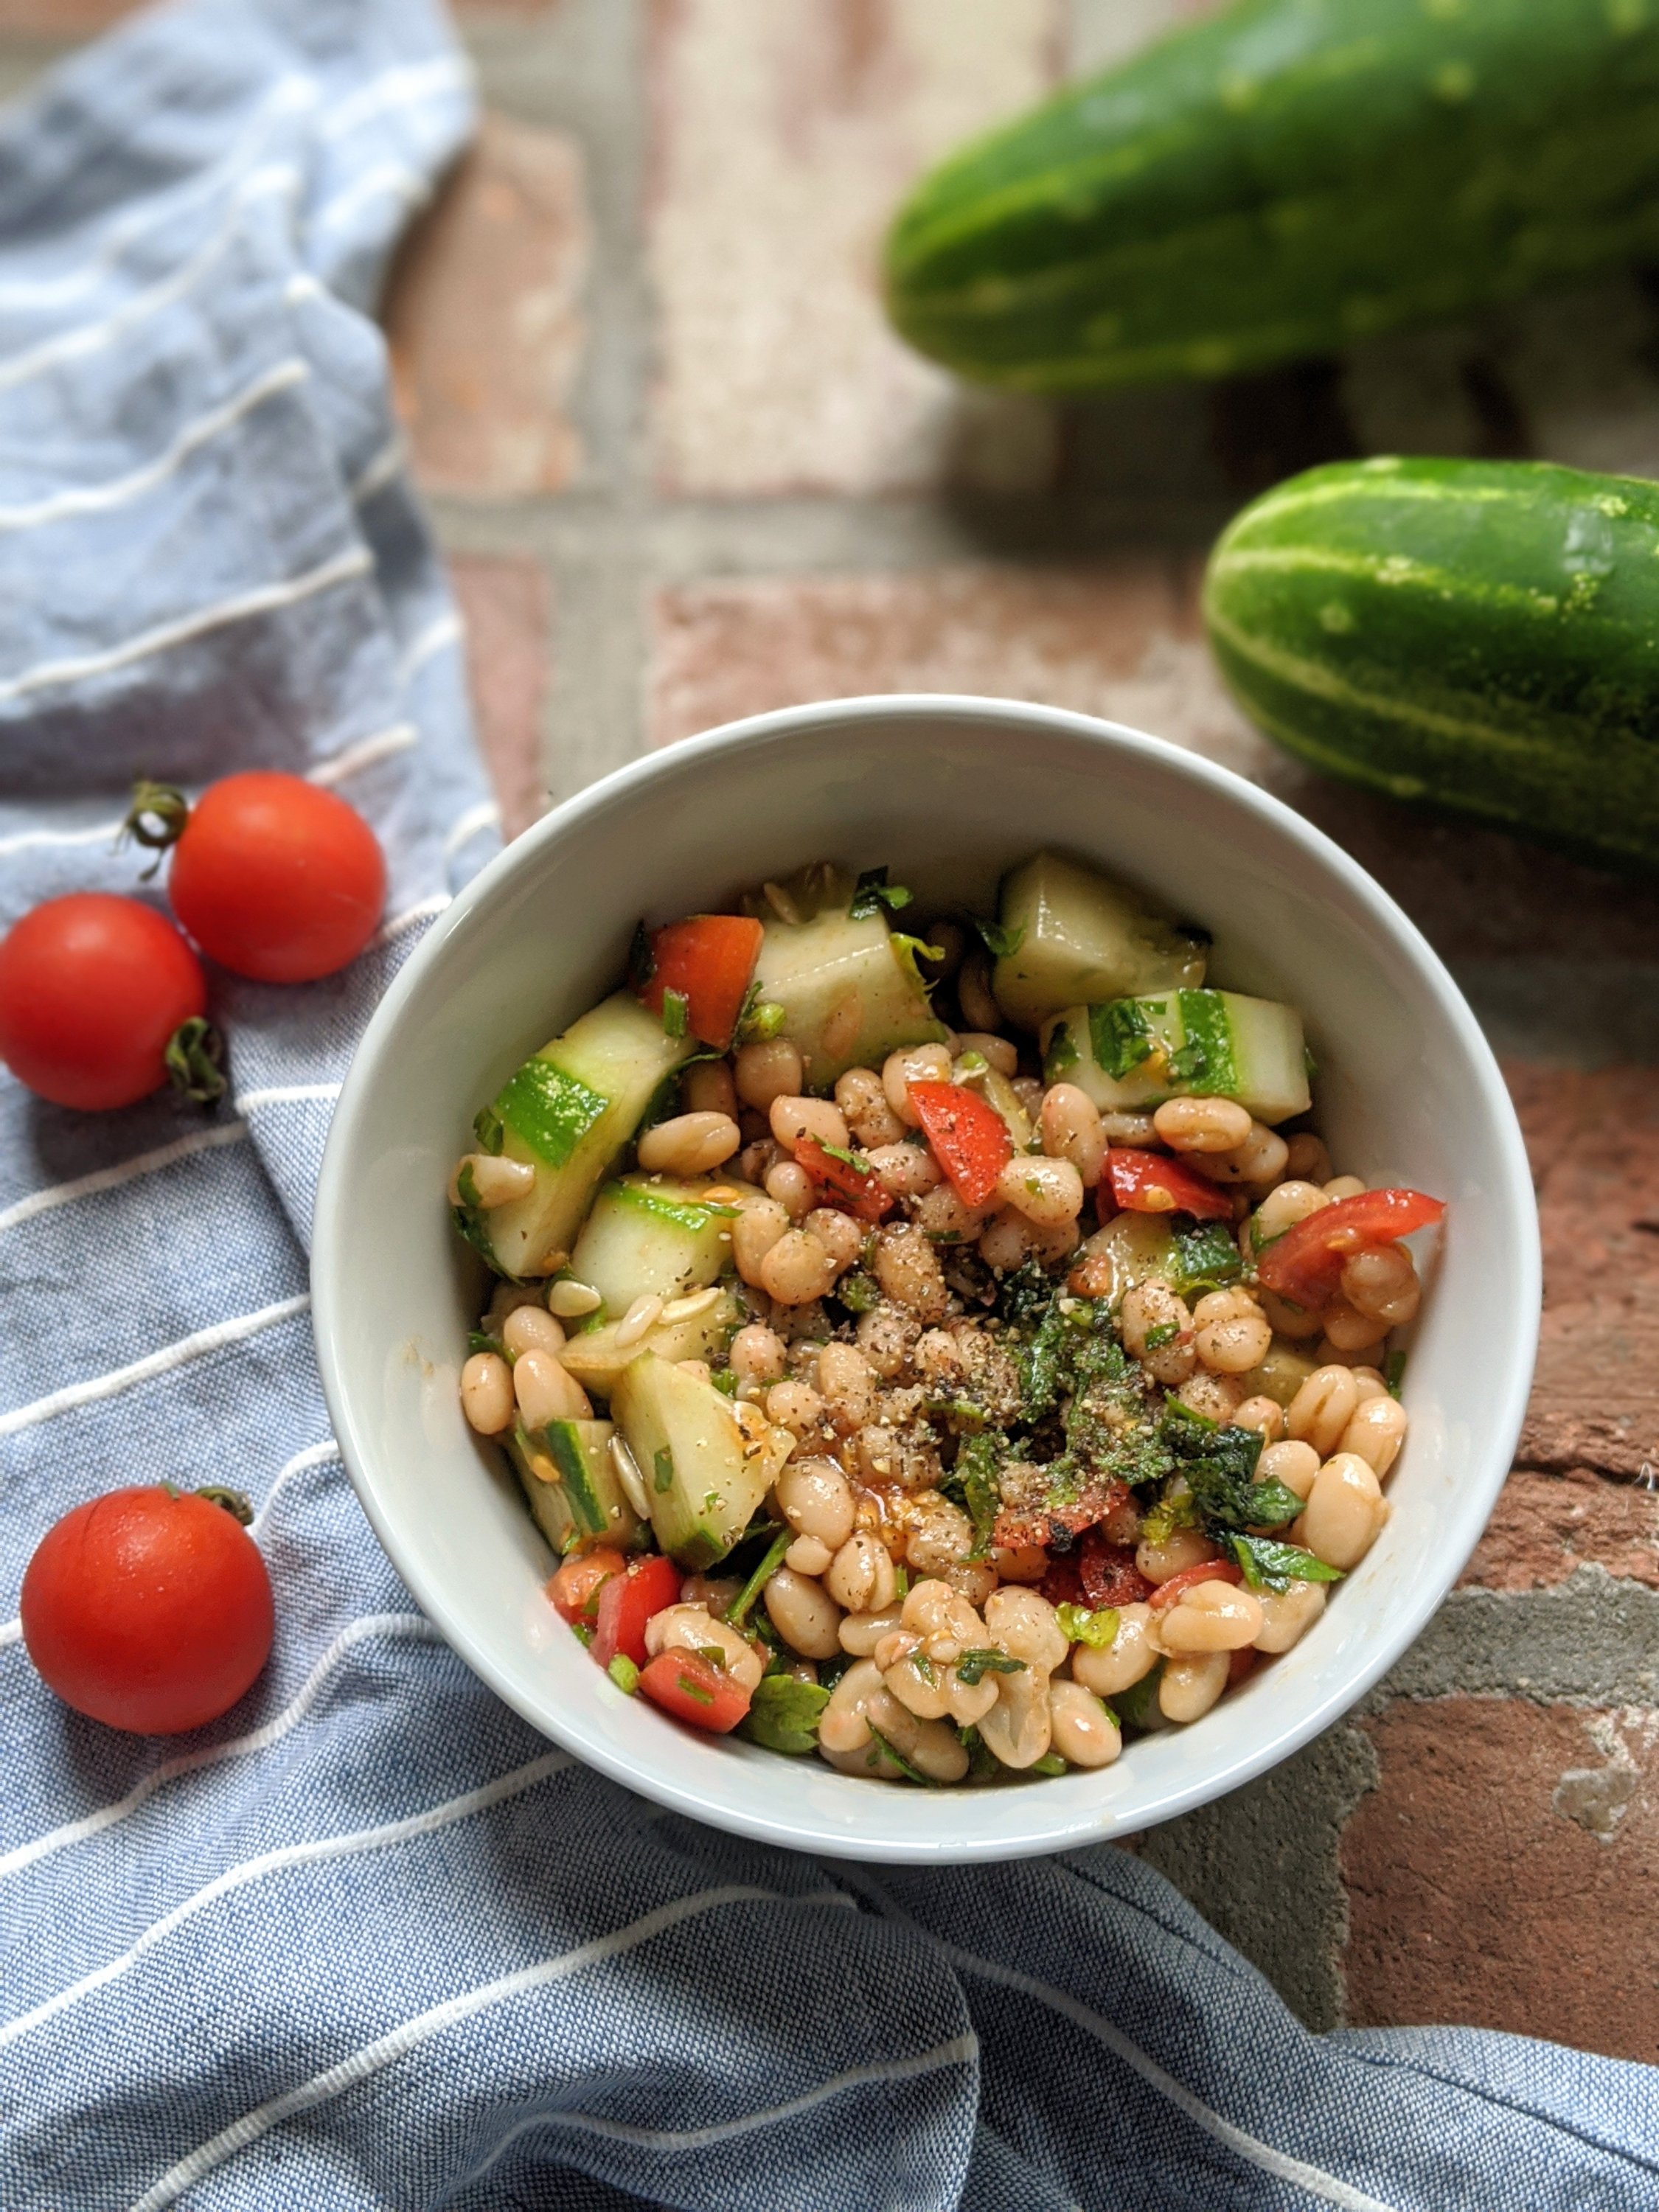 white bean and vegetable salad no cook summer recipes vegan gluten free vegetarian side dishes summer produce tomatoes and cucumbers from the garden